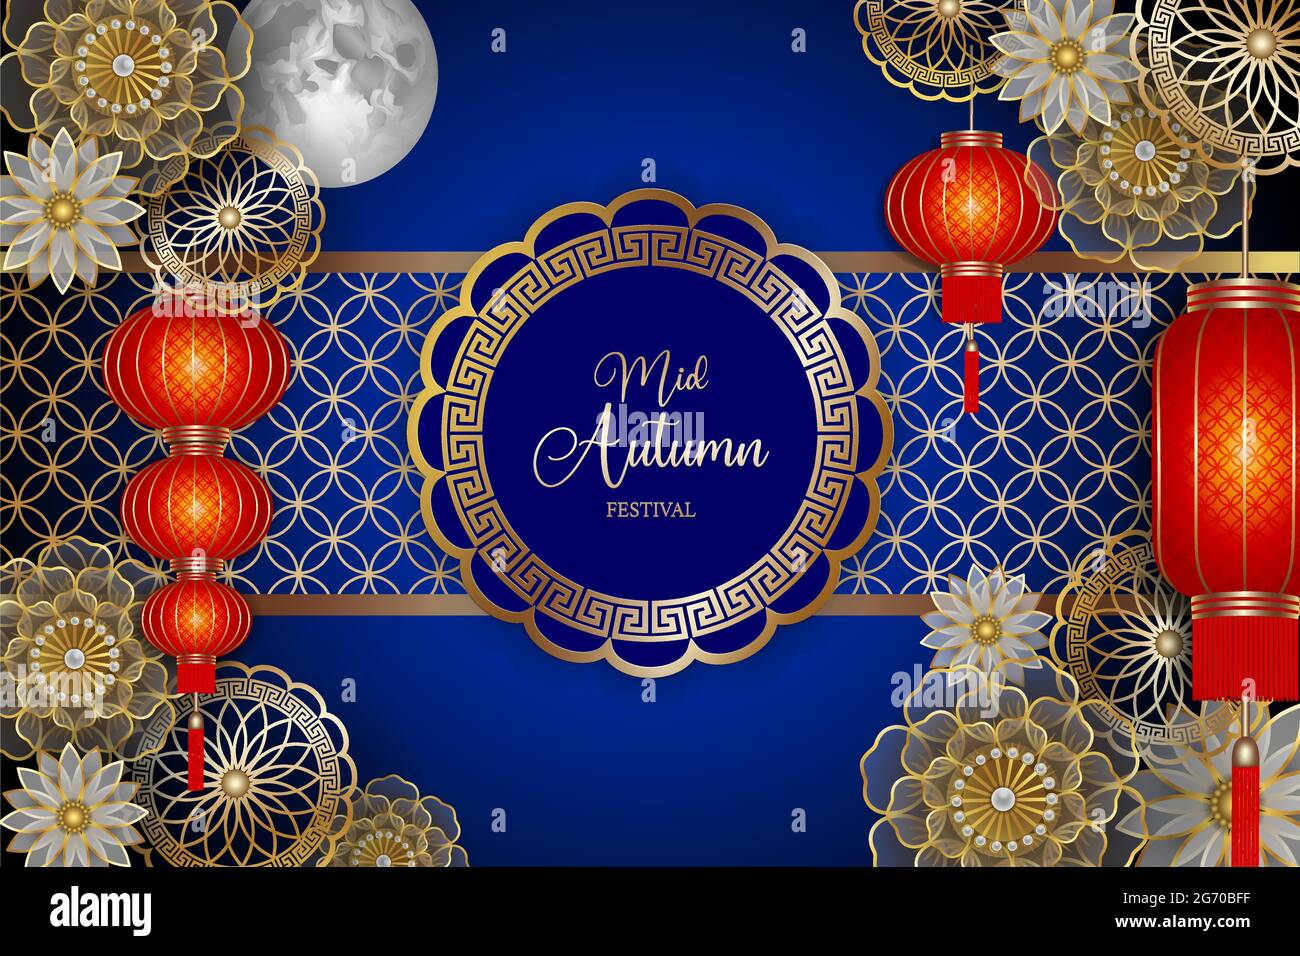 Chinese mid autumn festival background with red lanterns and golden flowers Stock Vector